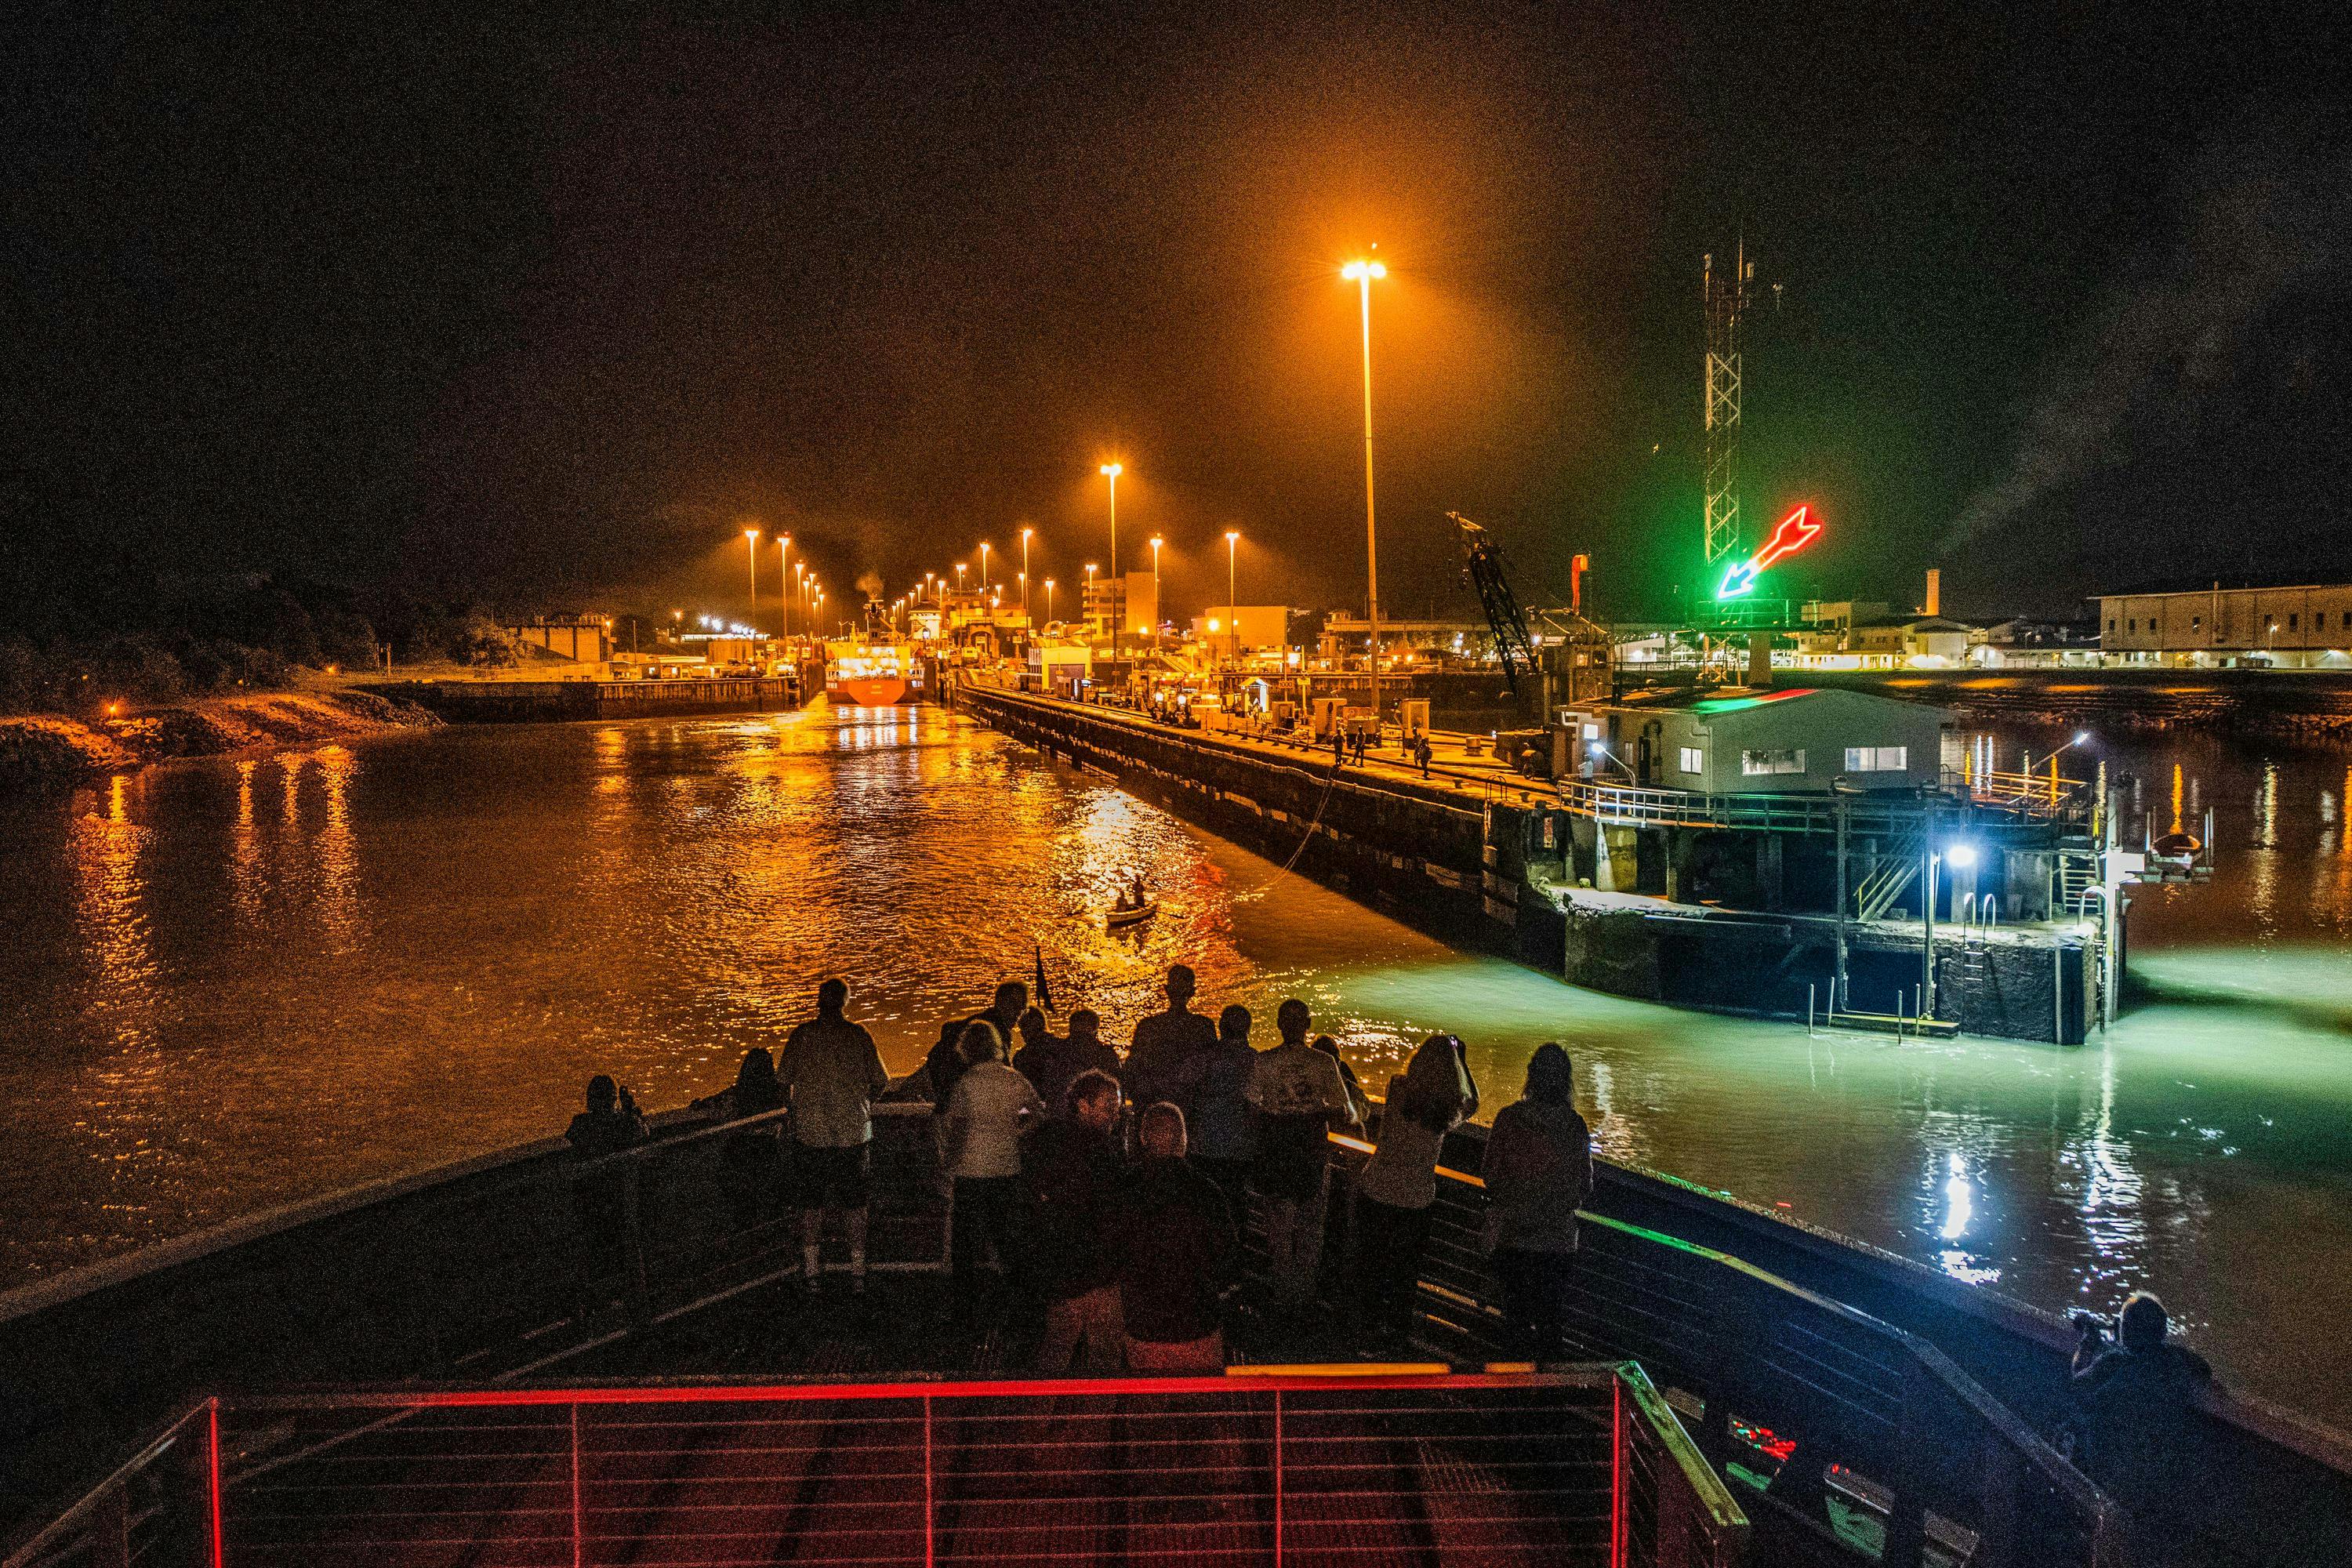 National Geographic Quest transiting the Panama Canal at night.